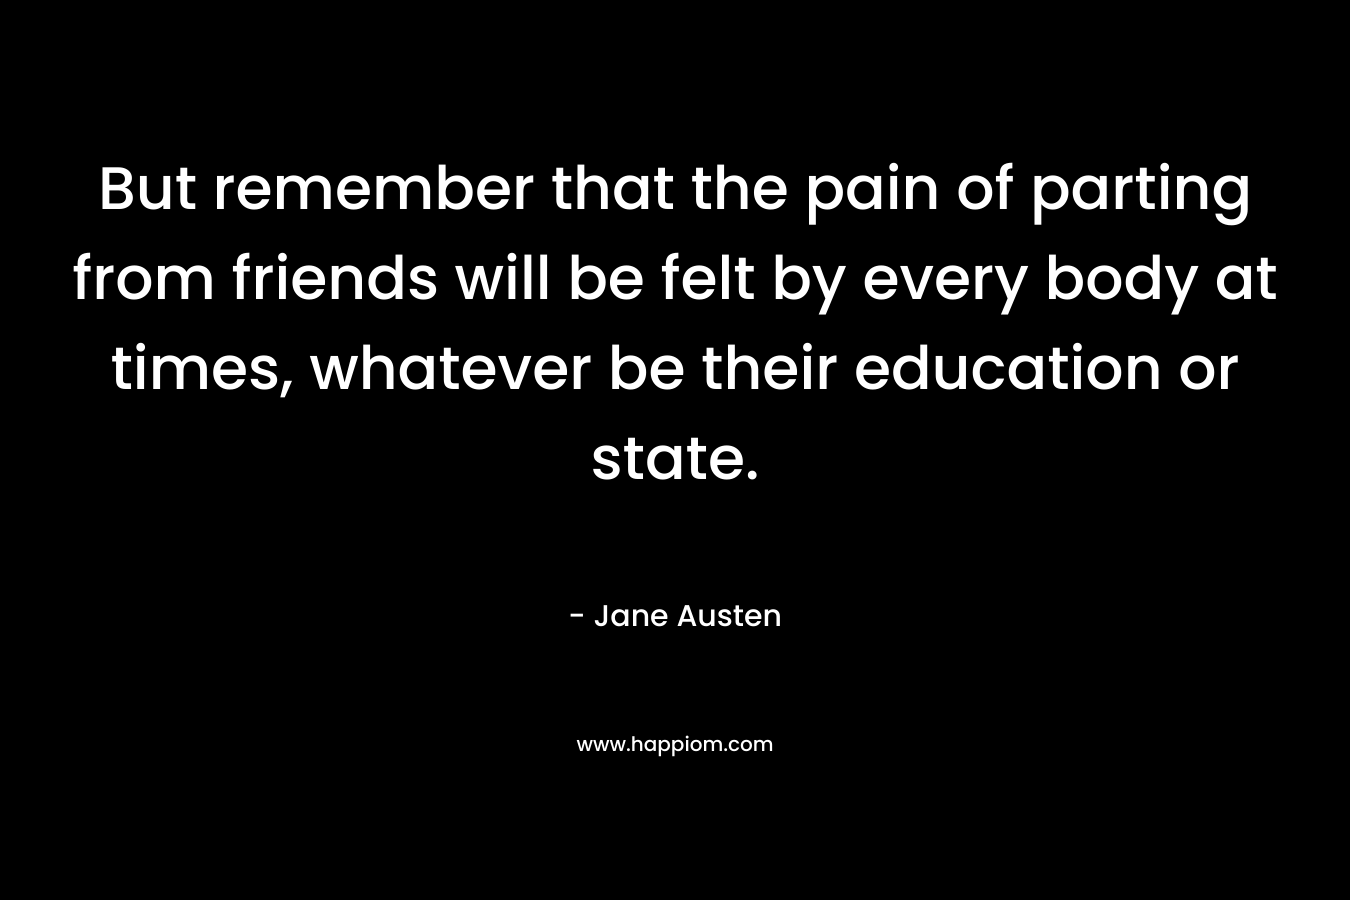 But remember that the pain of parting from friends will be felt by every body at times, whatever be their education or state.